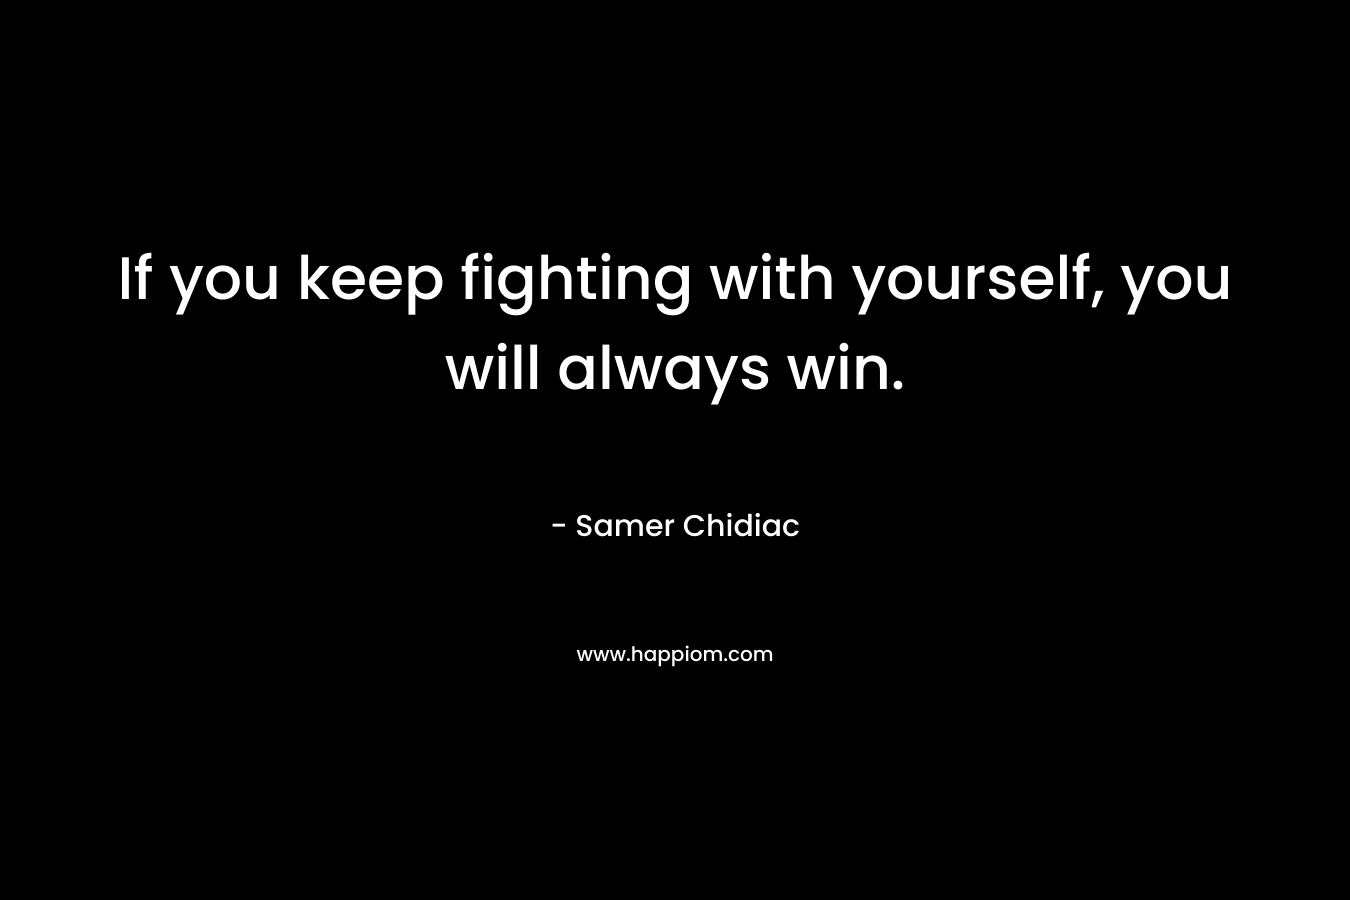 If you keep fighting with yourself, you will always win.